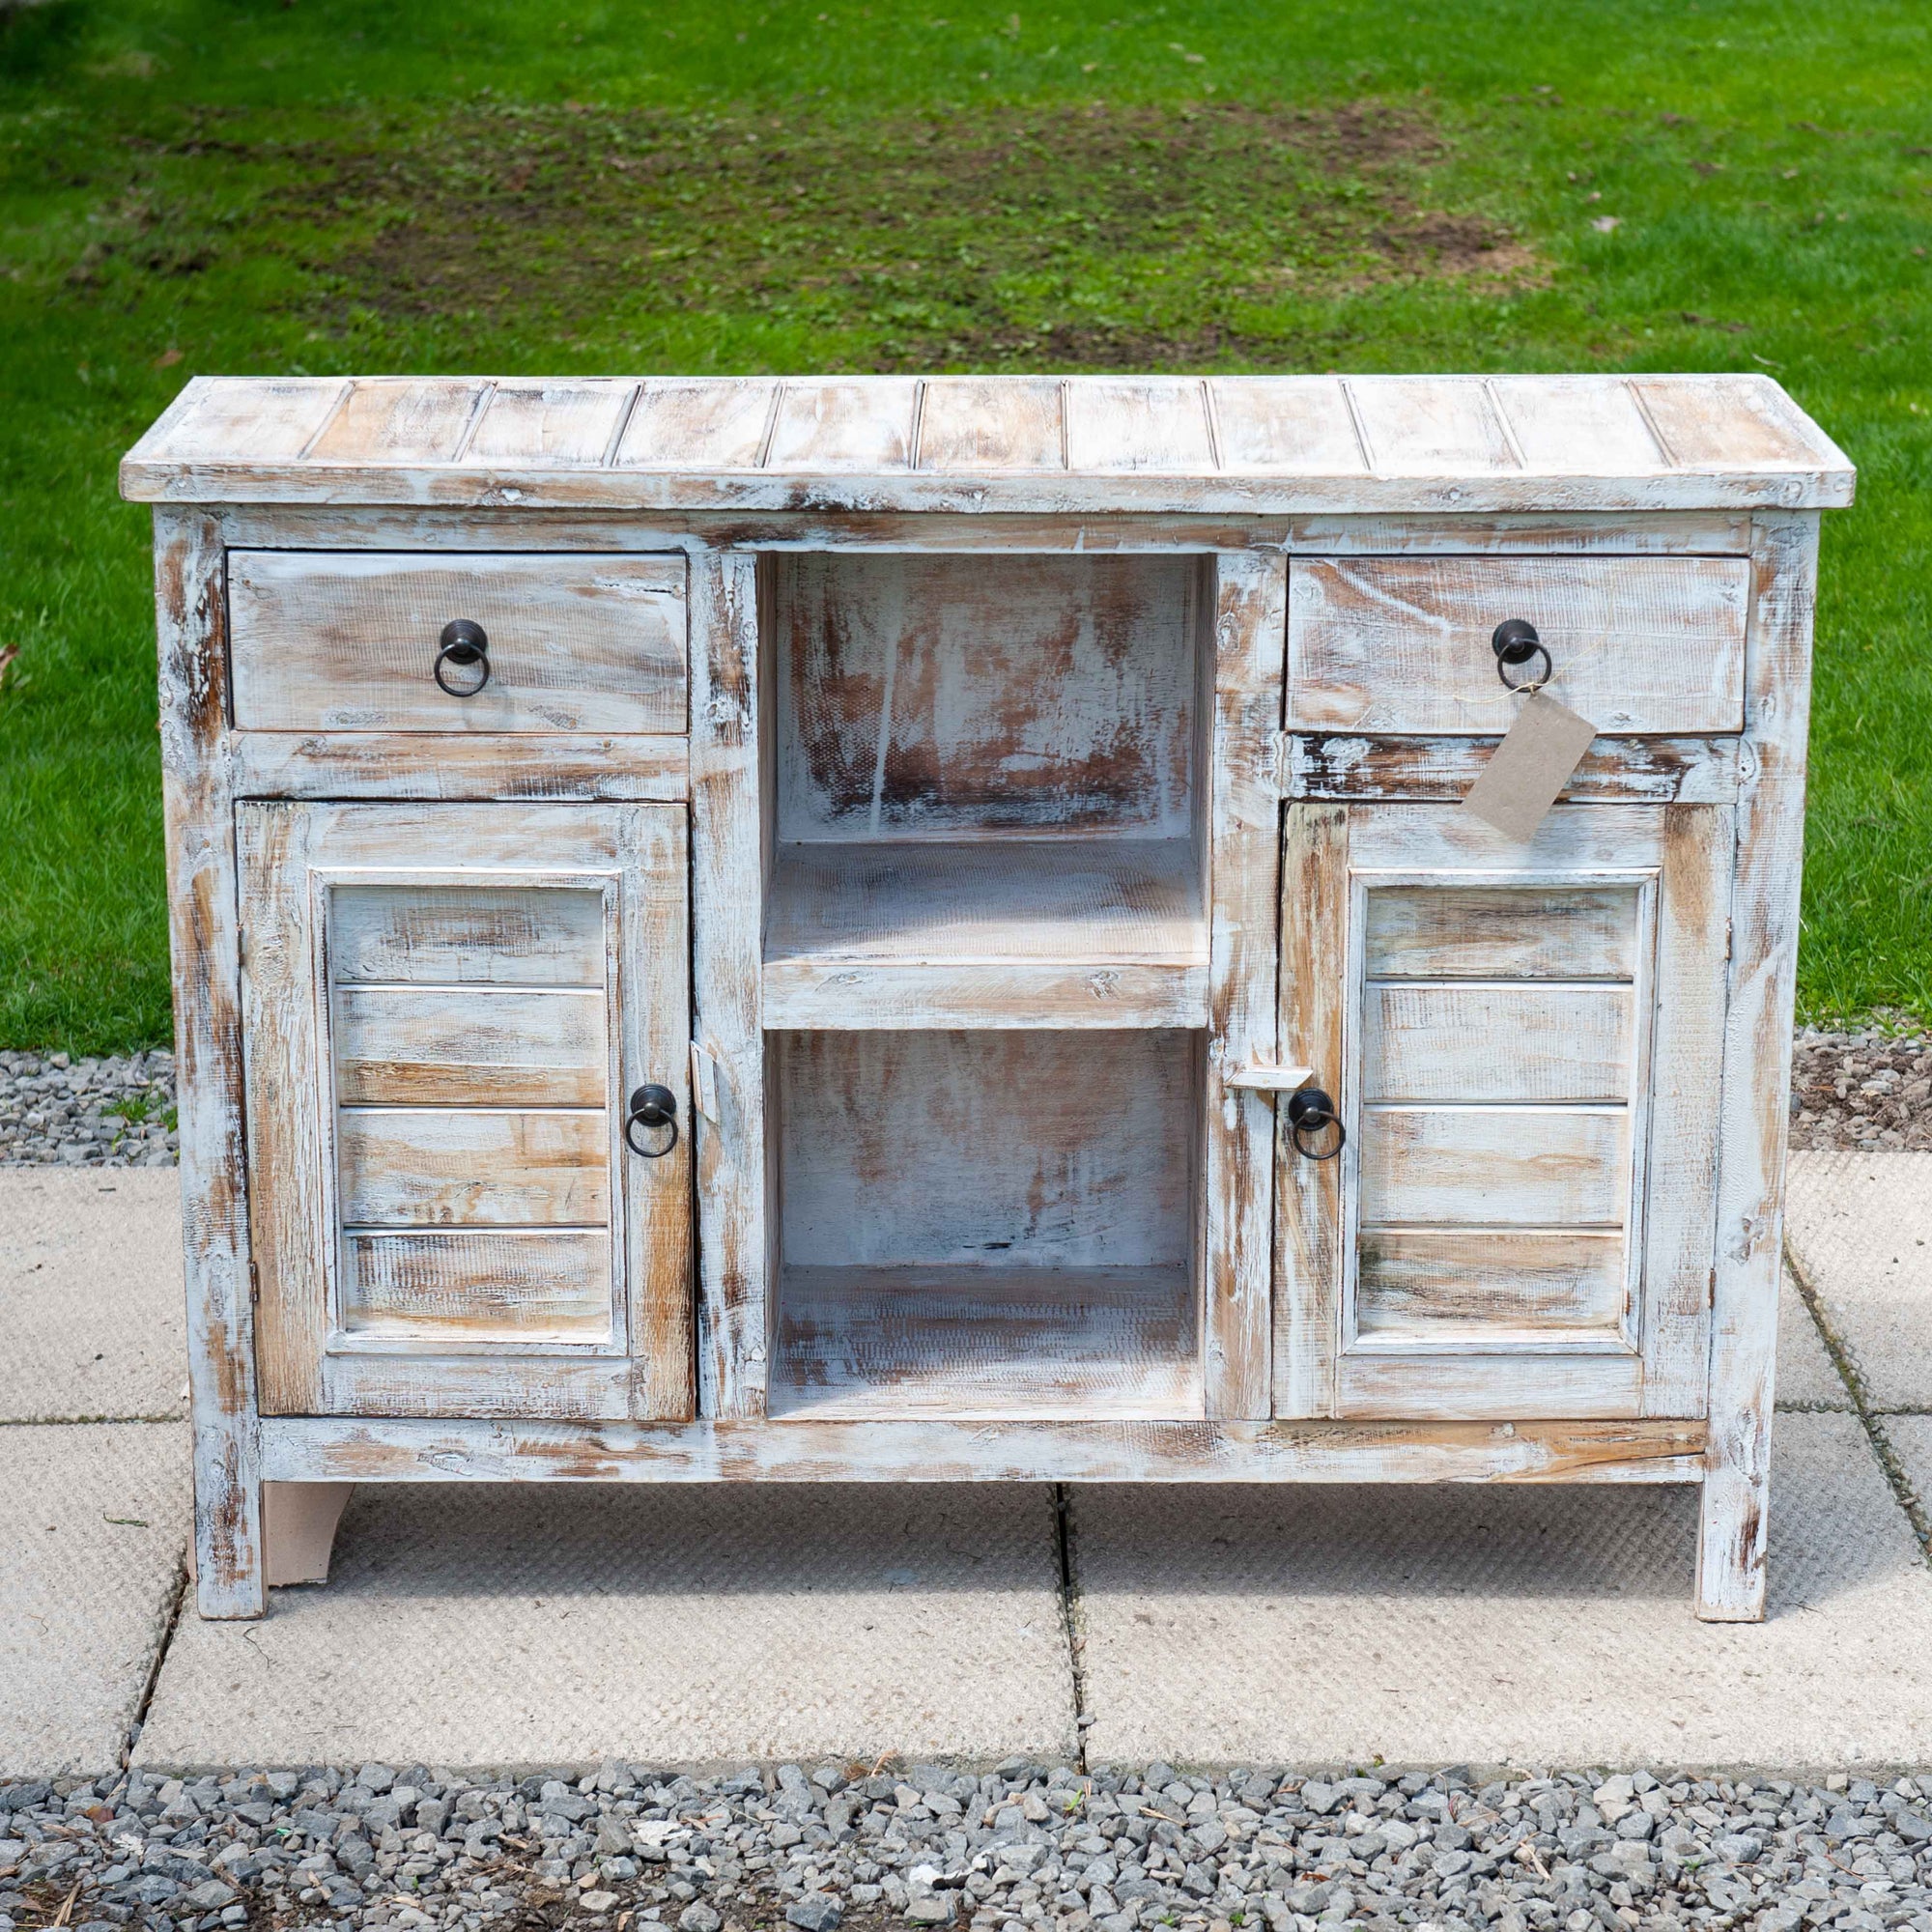 A medium size wooden cabinet in distressed white with 2 doors and storage shelves